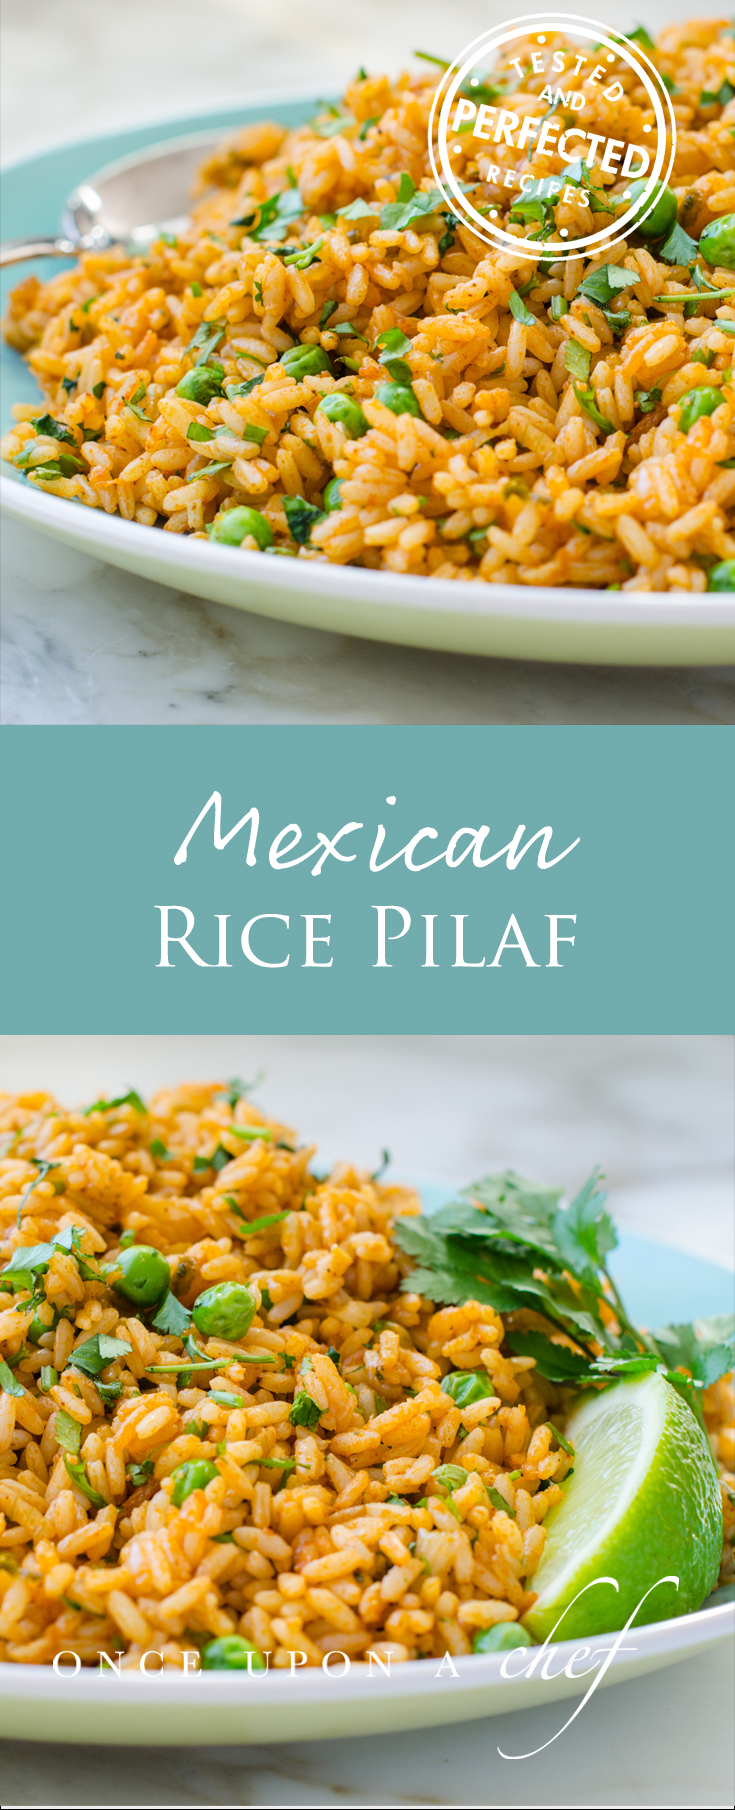 Mexican Rice Pilaf - Once Upon a Chef